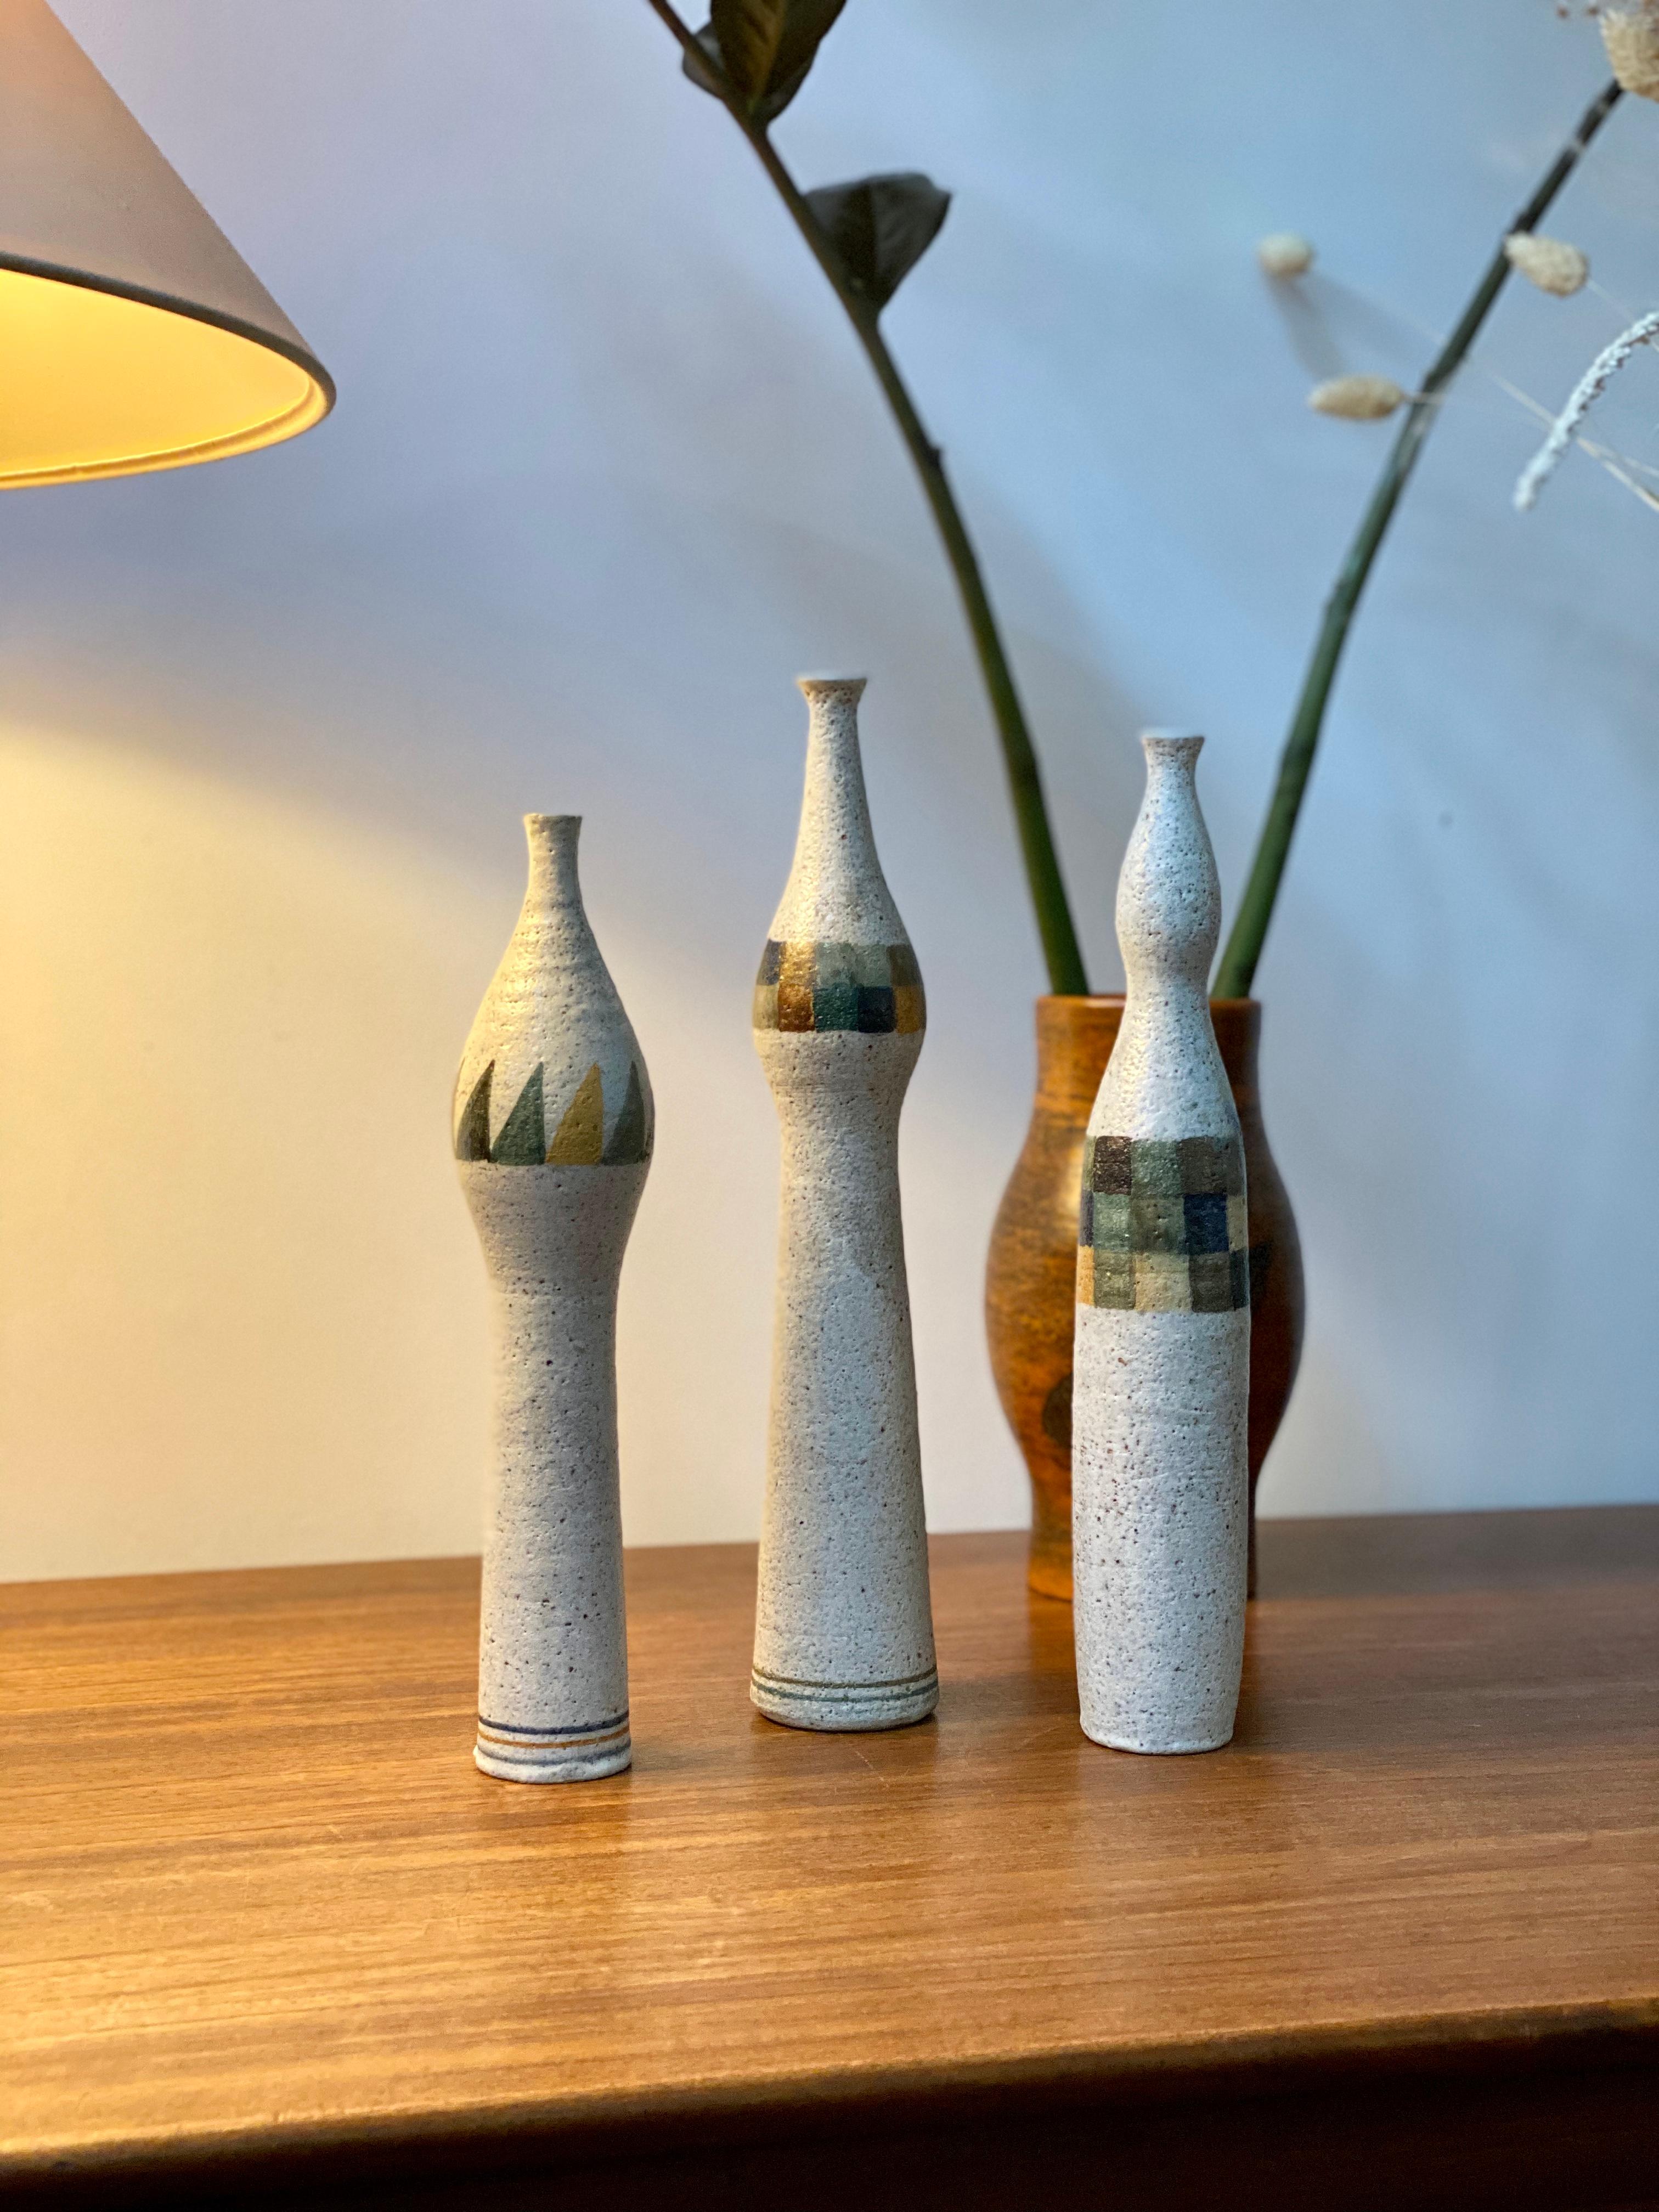 Set of three bottle-shaped single-flower vases by Bruno Gambone (circa 1990s). All three are glazed stoneware pieces with modern, multi-coloured geometric motif. The middle-sized vase has blue colouring which extends beyond one of the geometric